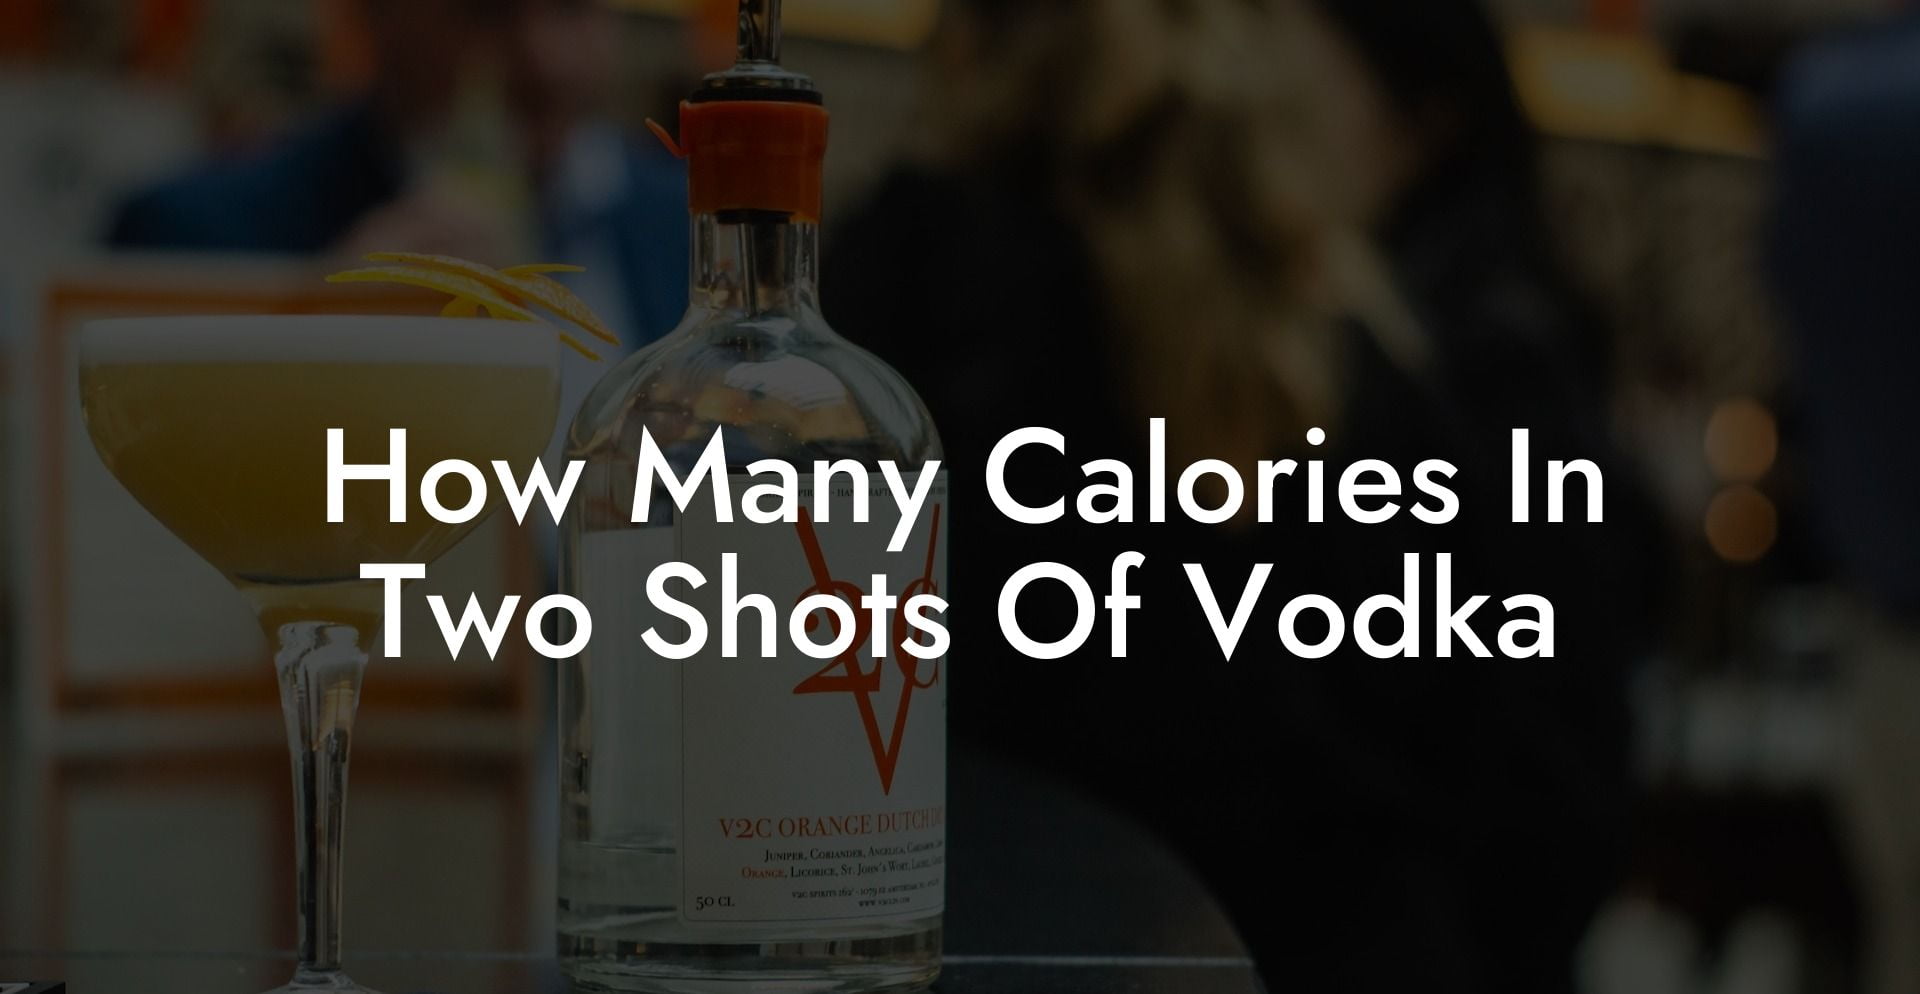 How Many Calories In Two Shots Of Vodka